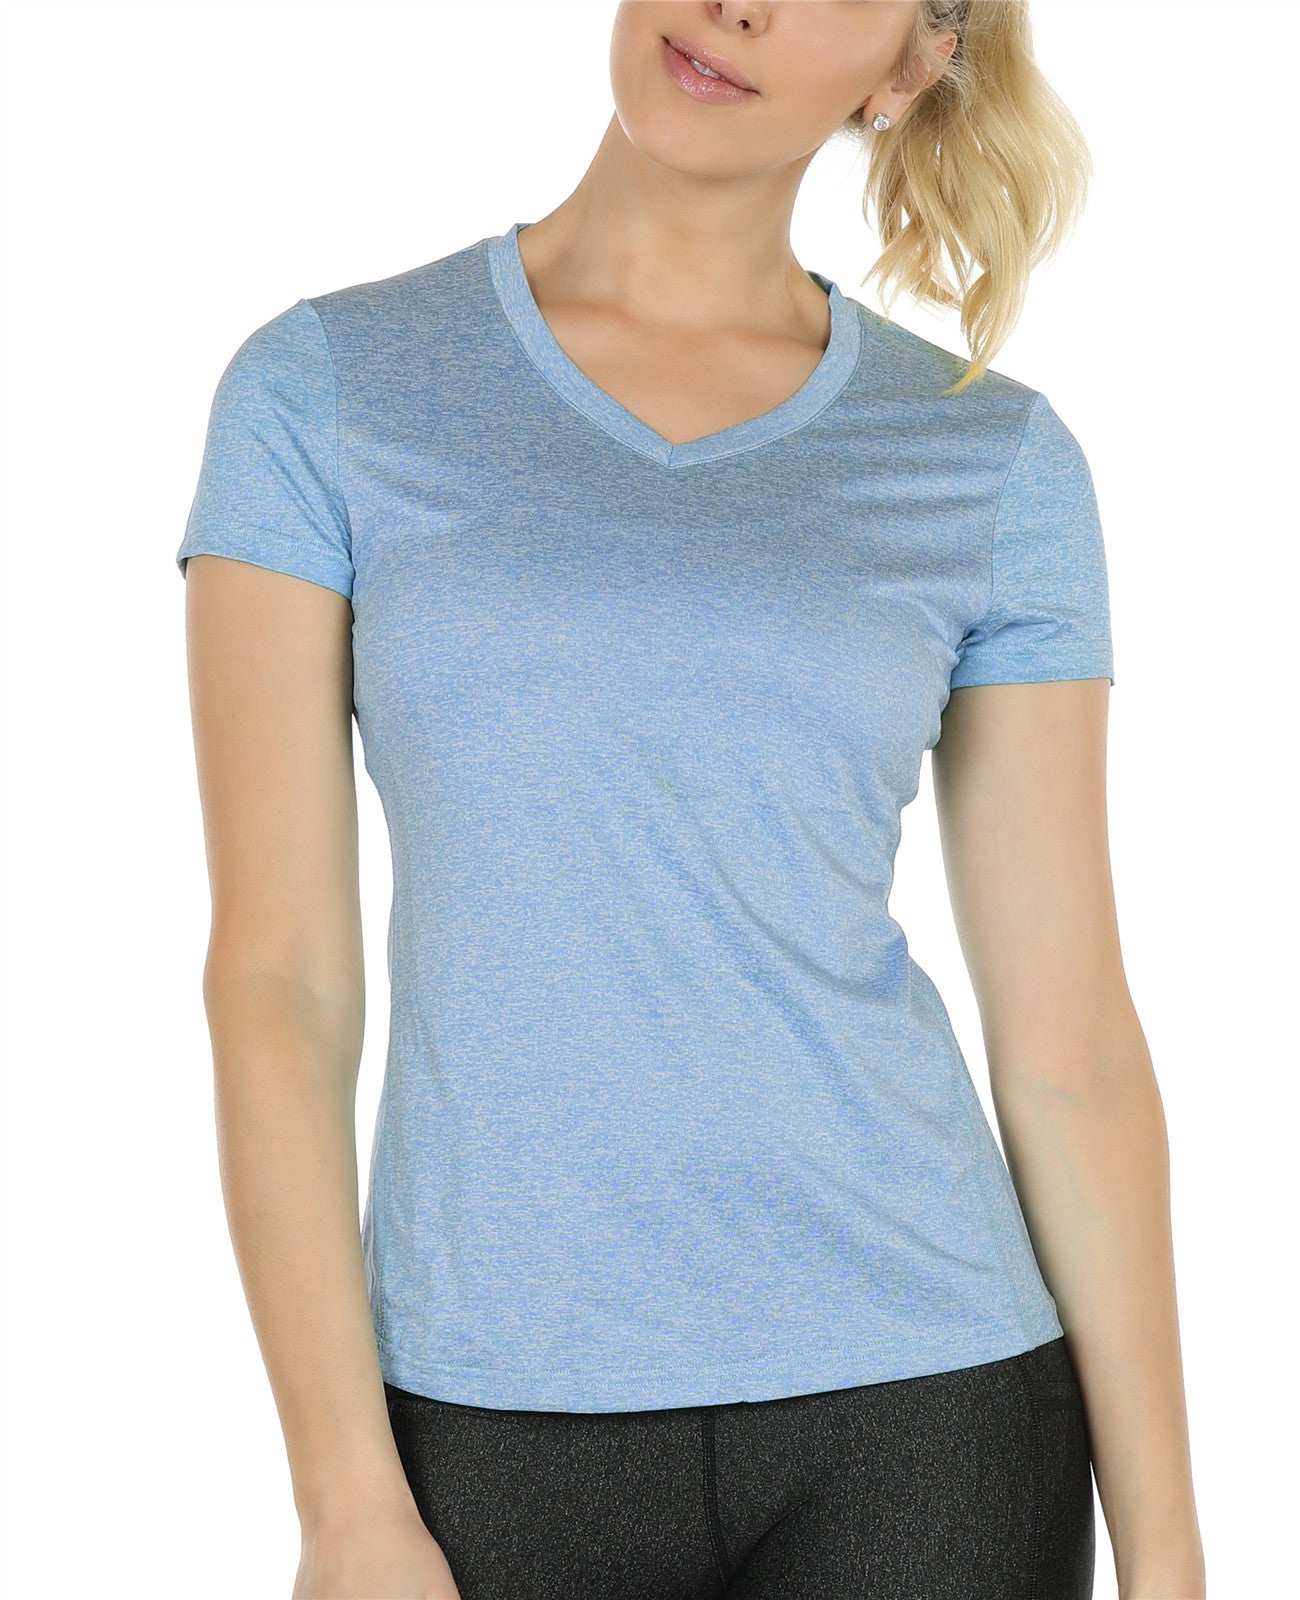 Sports T-shirts Women, Workout Tops, Gym Clothing